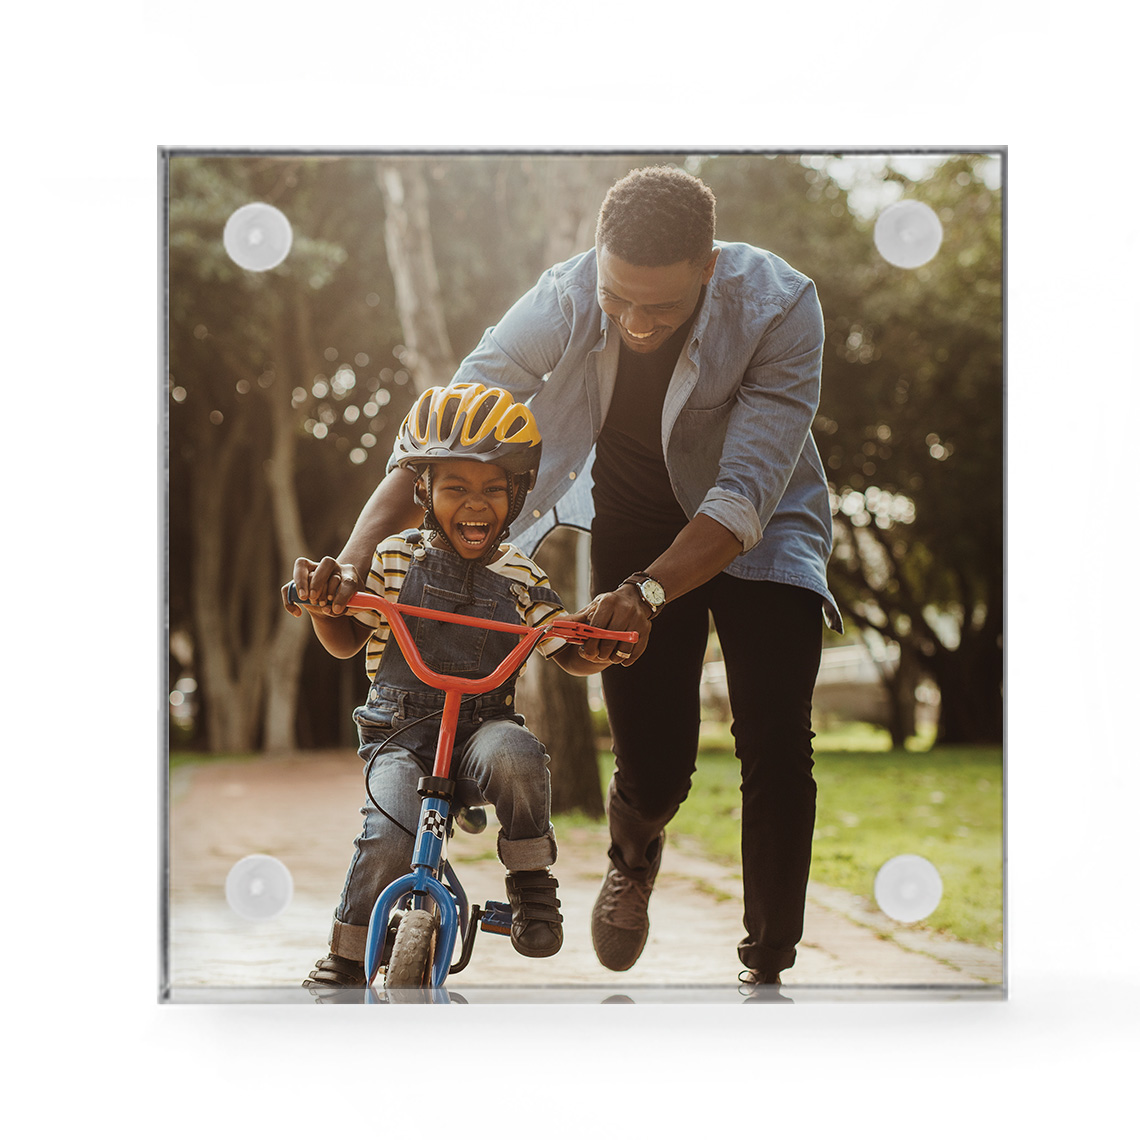 Square Custom Photo Magnet | Square Magnetic Photos for Home School Office  Kitchen Fridge Special Decoration | Save Your Best Personalized Picture